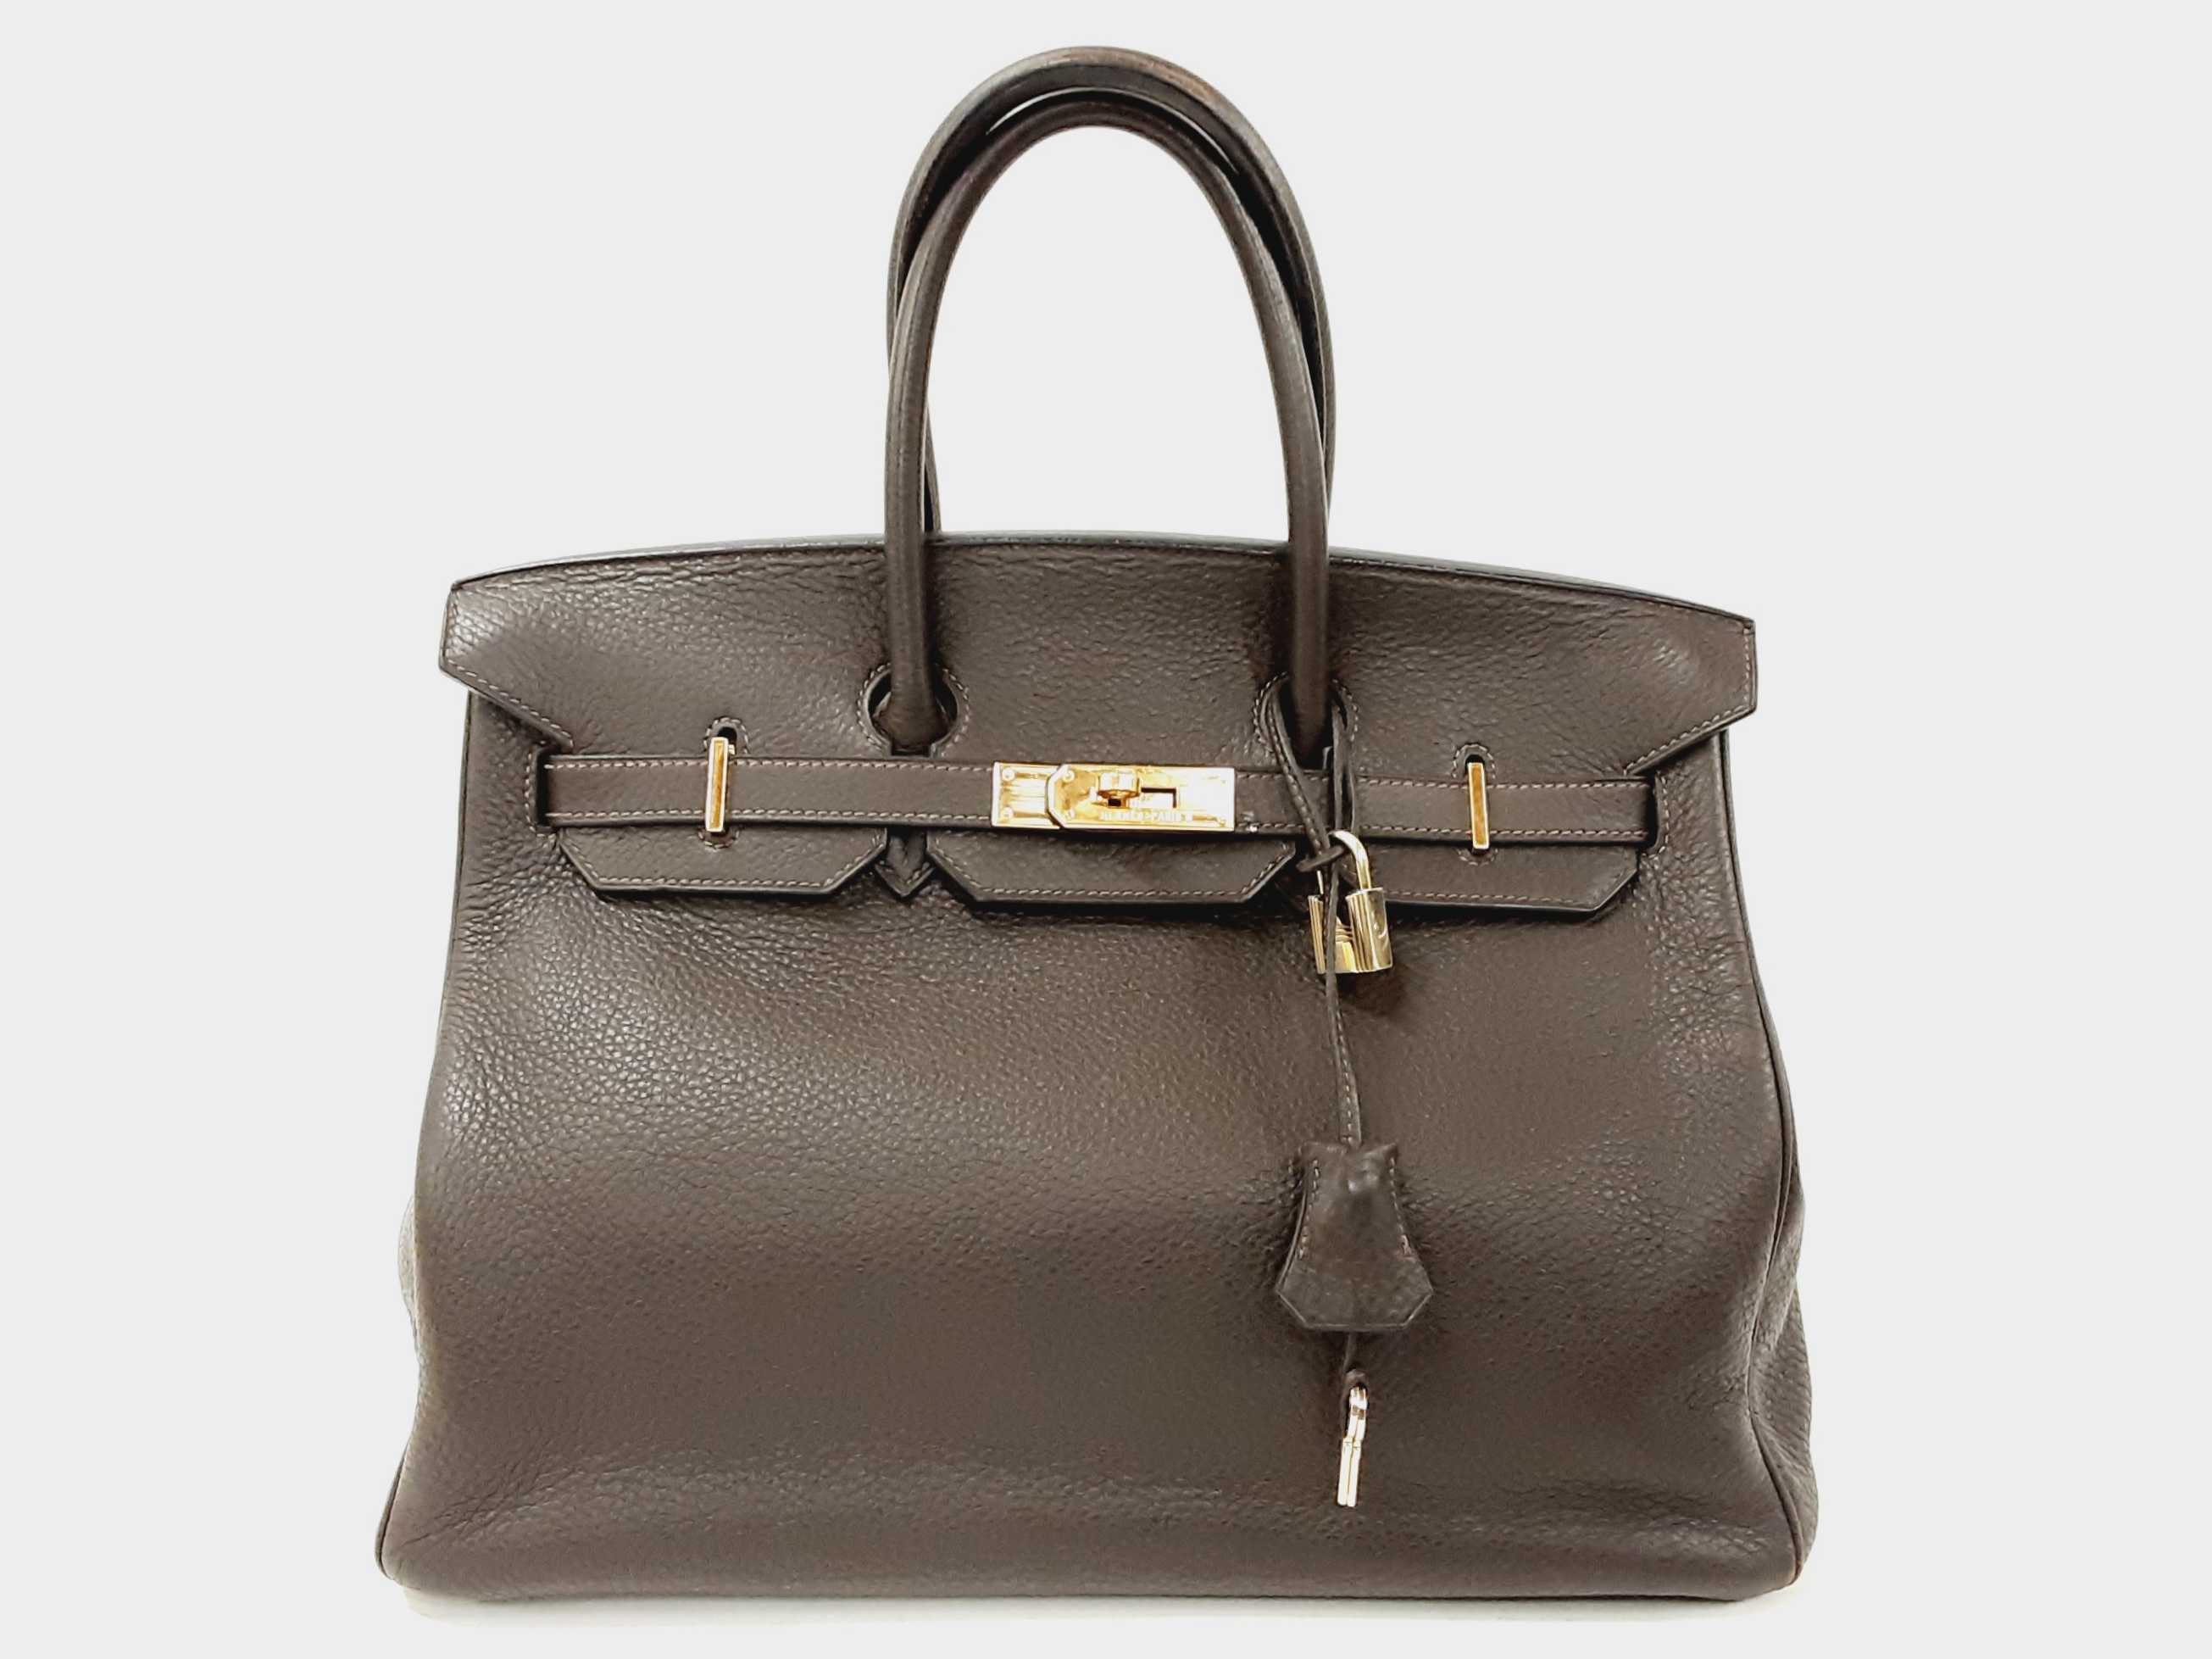 Hermès Birkin 35cm In Chocolate Brown Clemence Leather With Gold